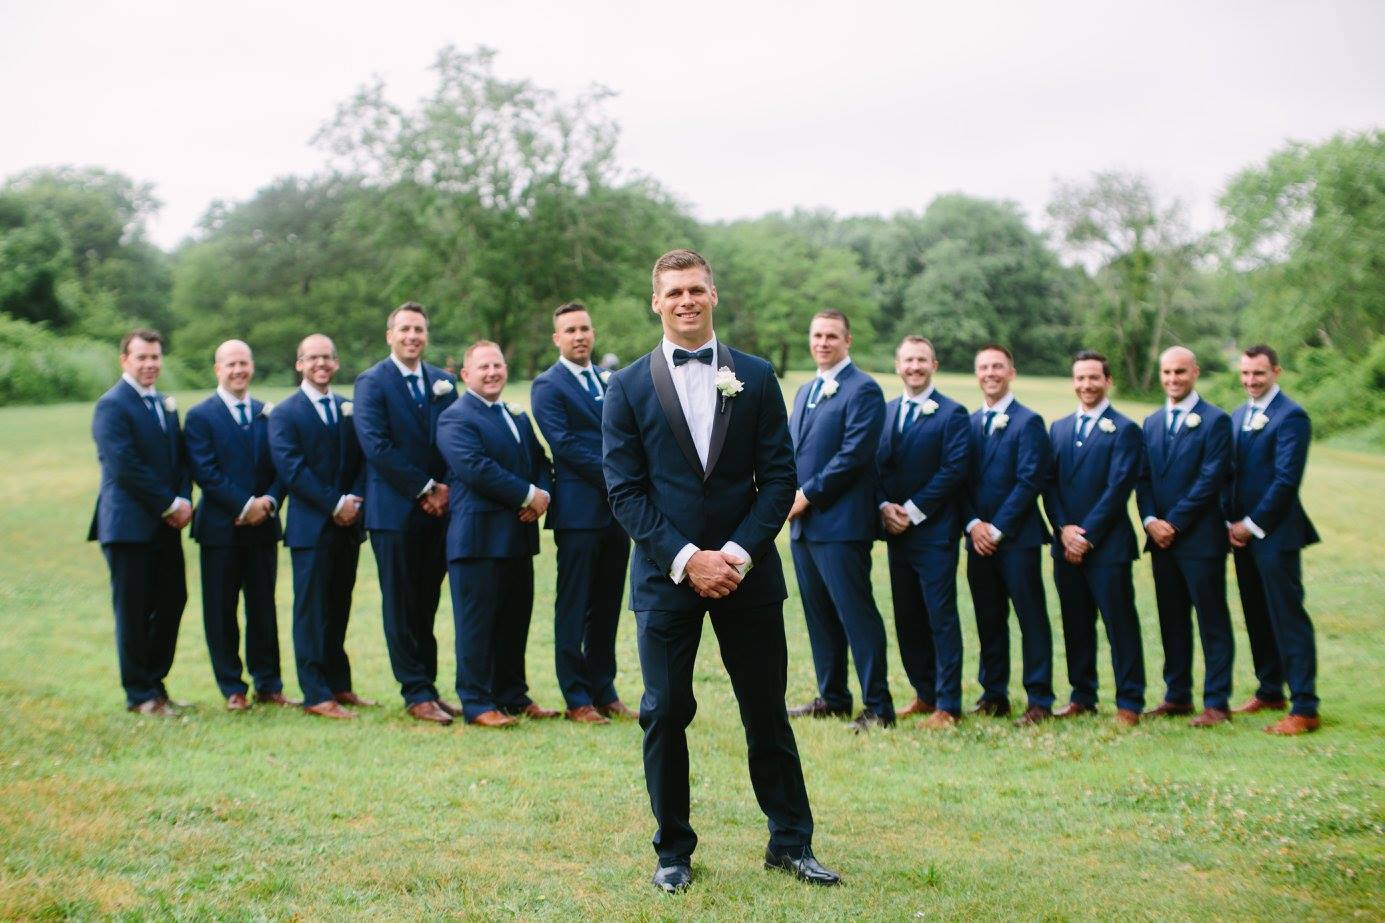 Navy Groom and Groomsmen: A Timeless Wedding Look That Will Wow Your ...